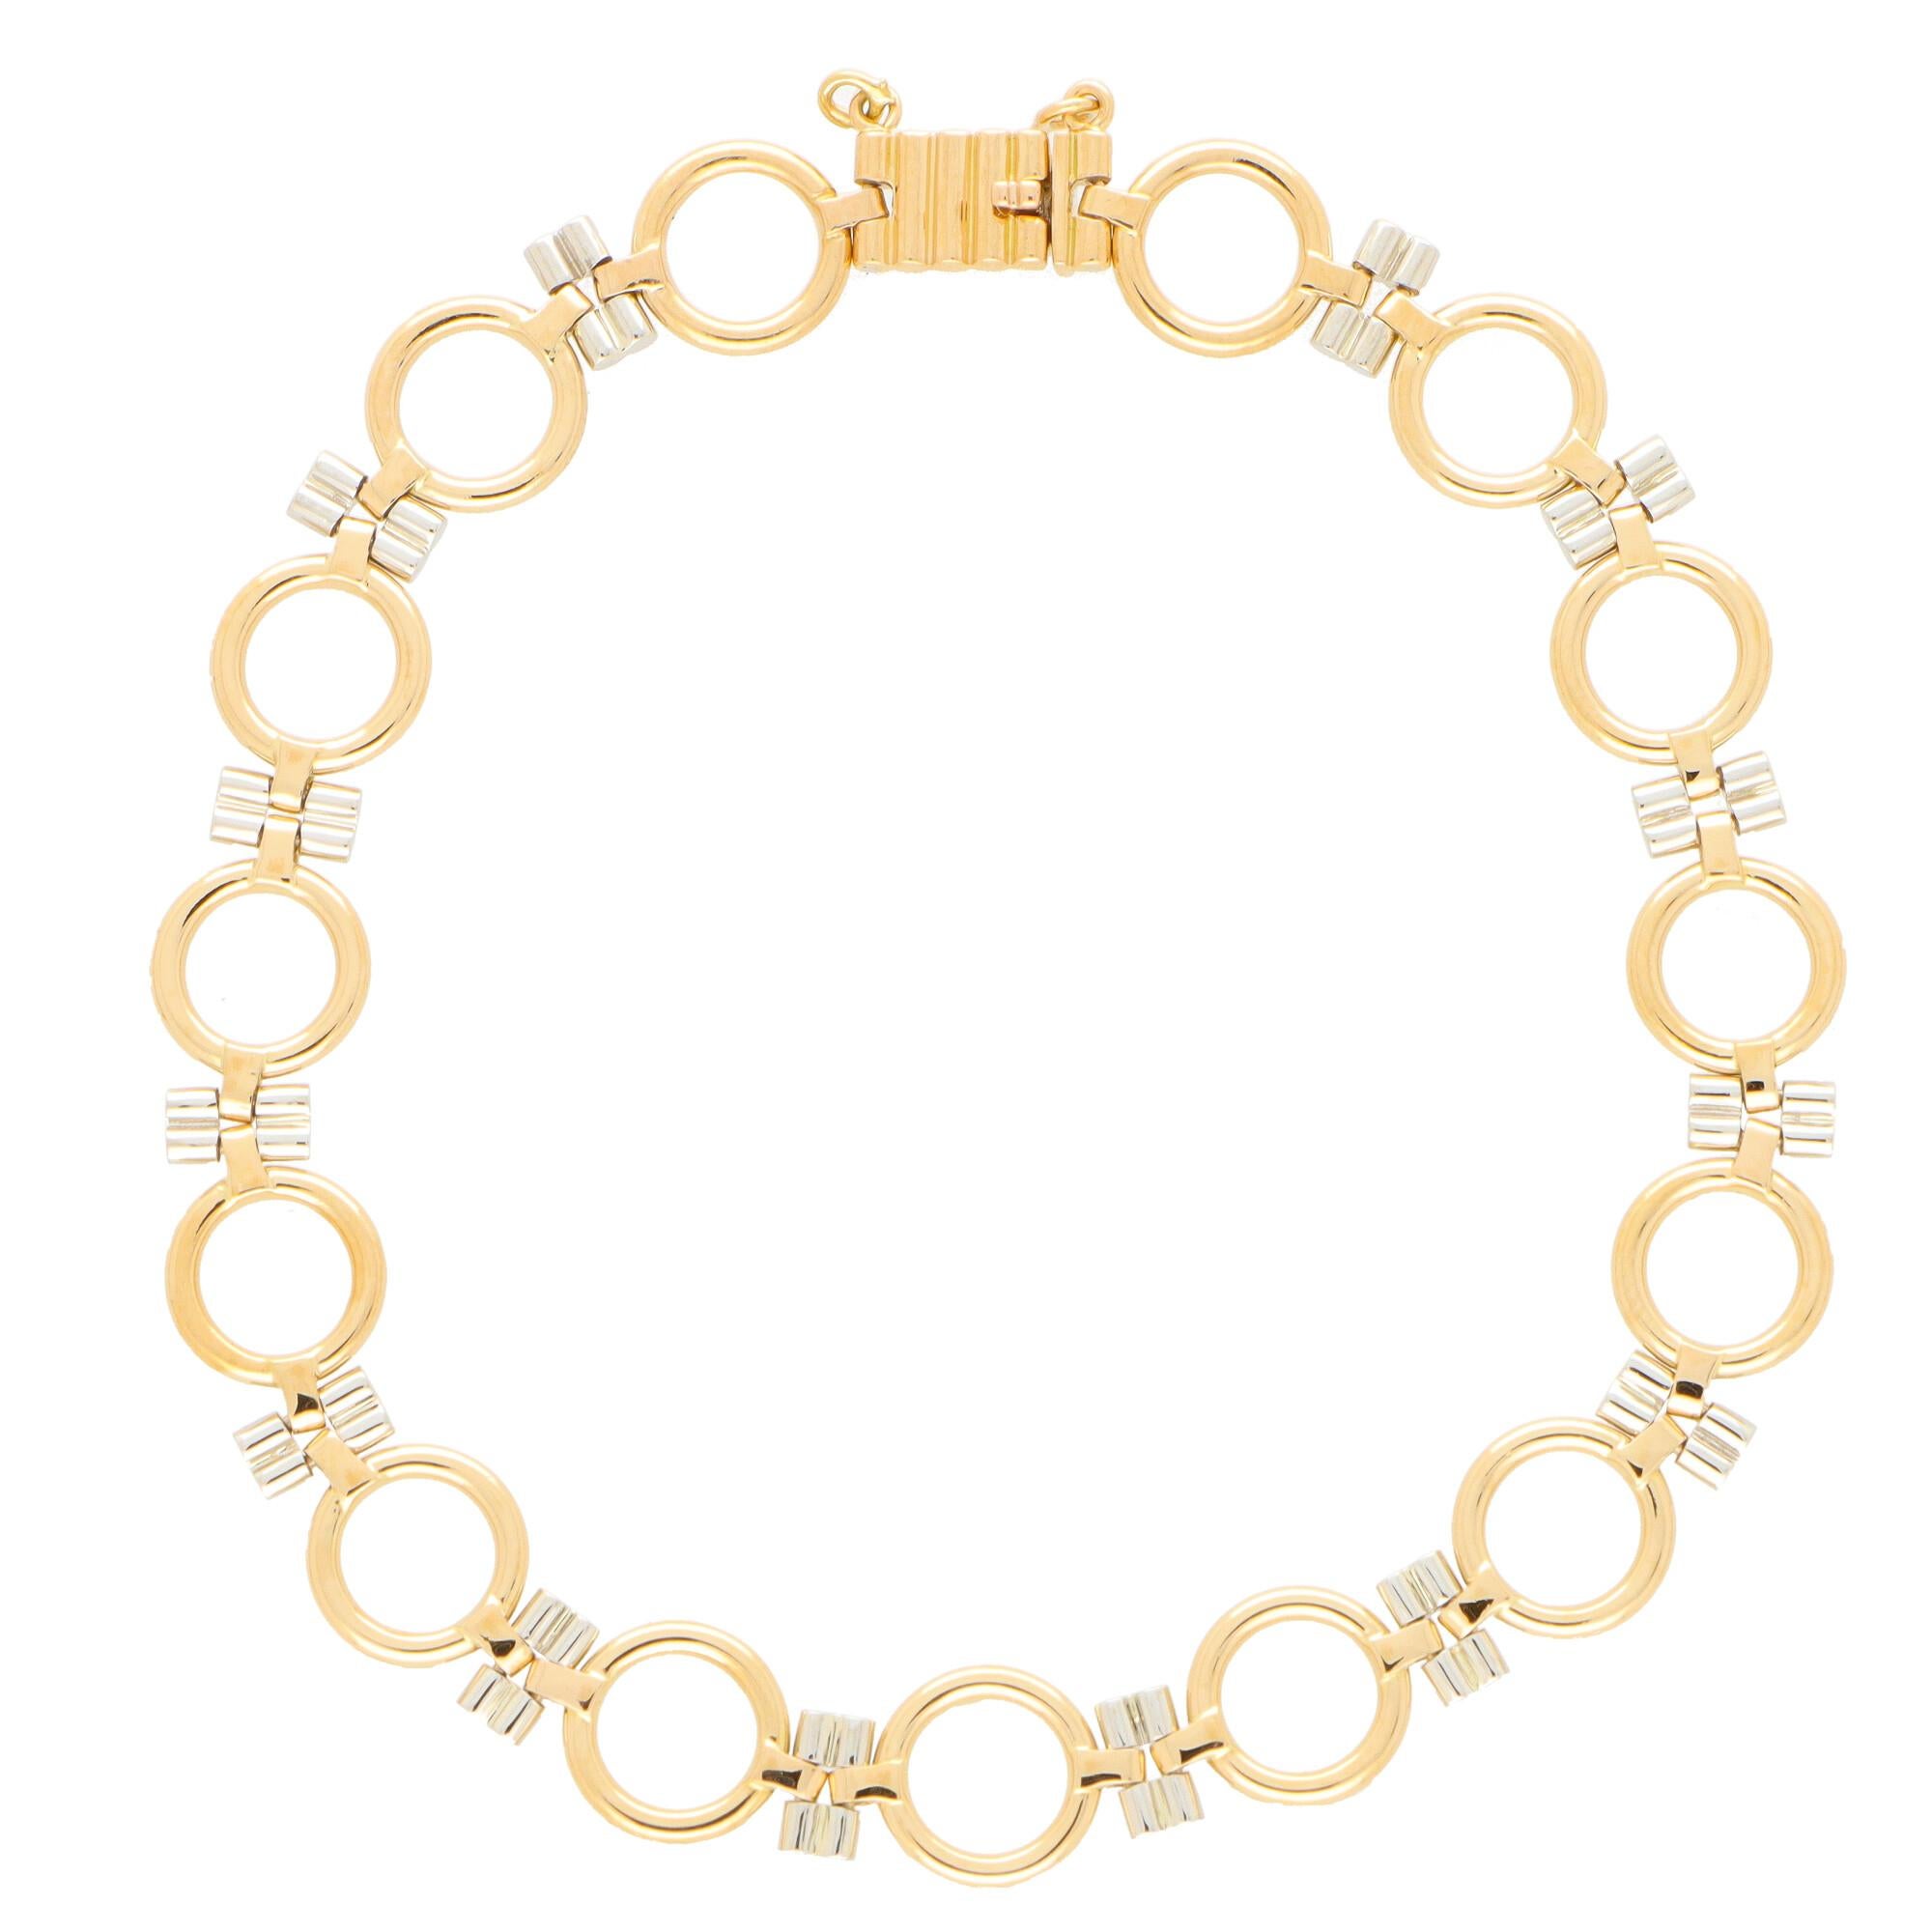 Vintage Cartier Open Link Bracelet Set in 18k Yellow and White Gold